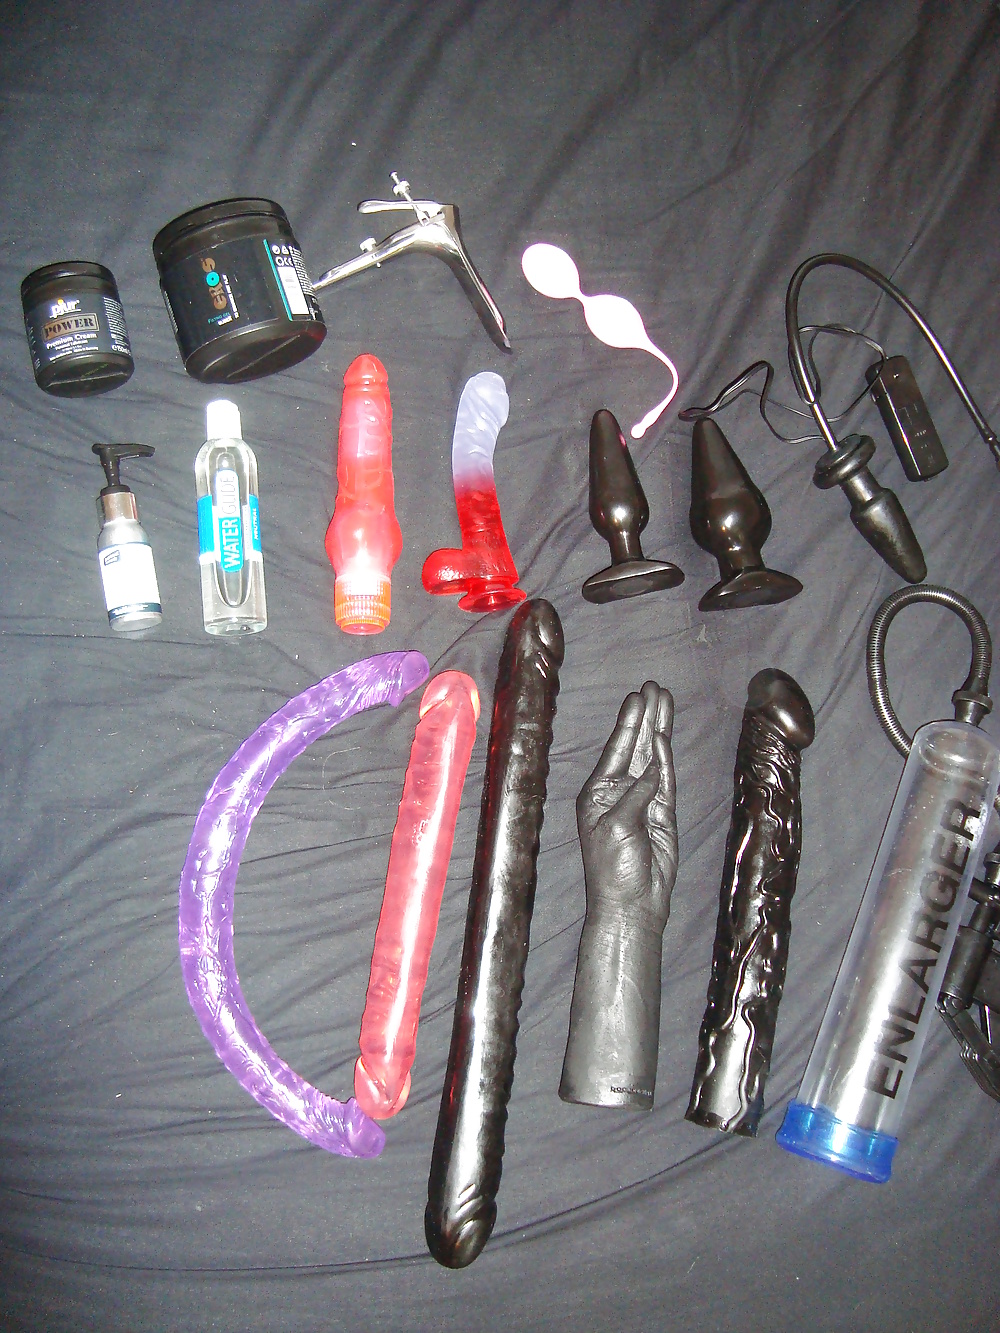 My new toys and piercings